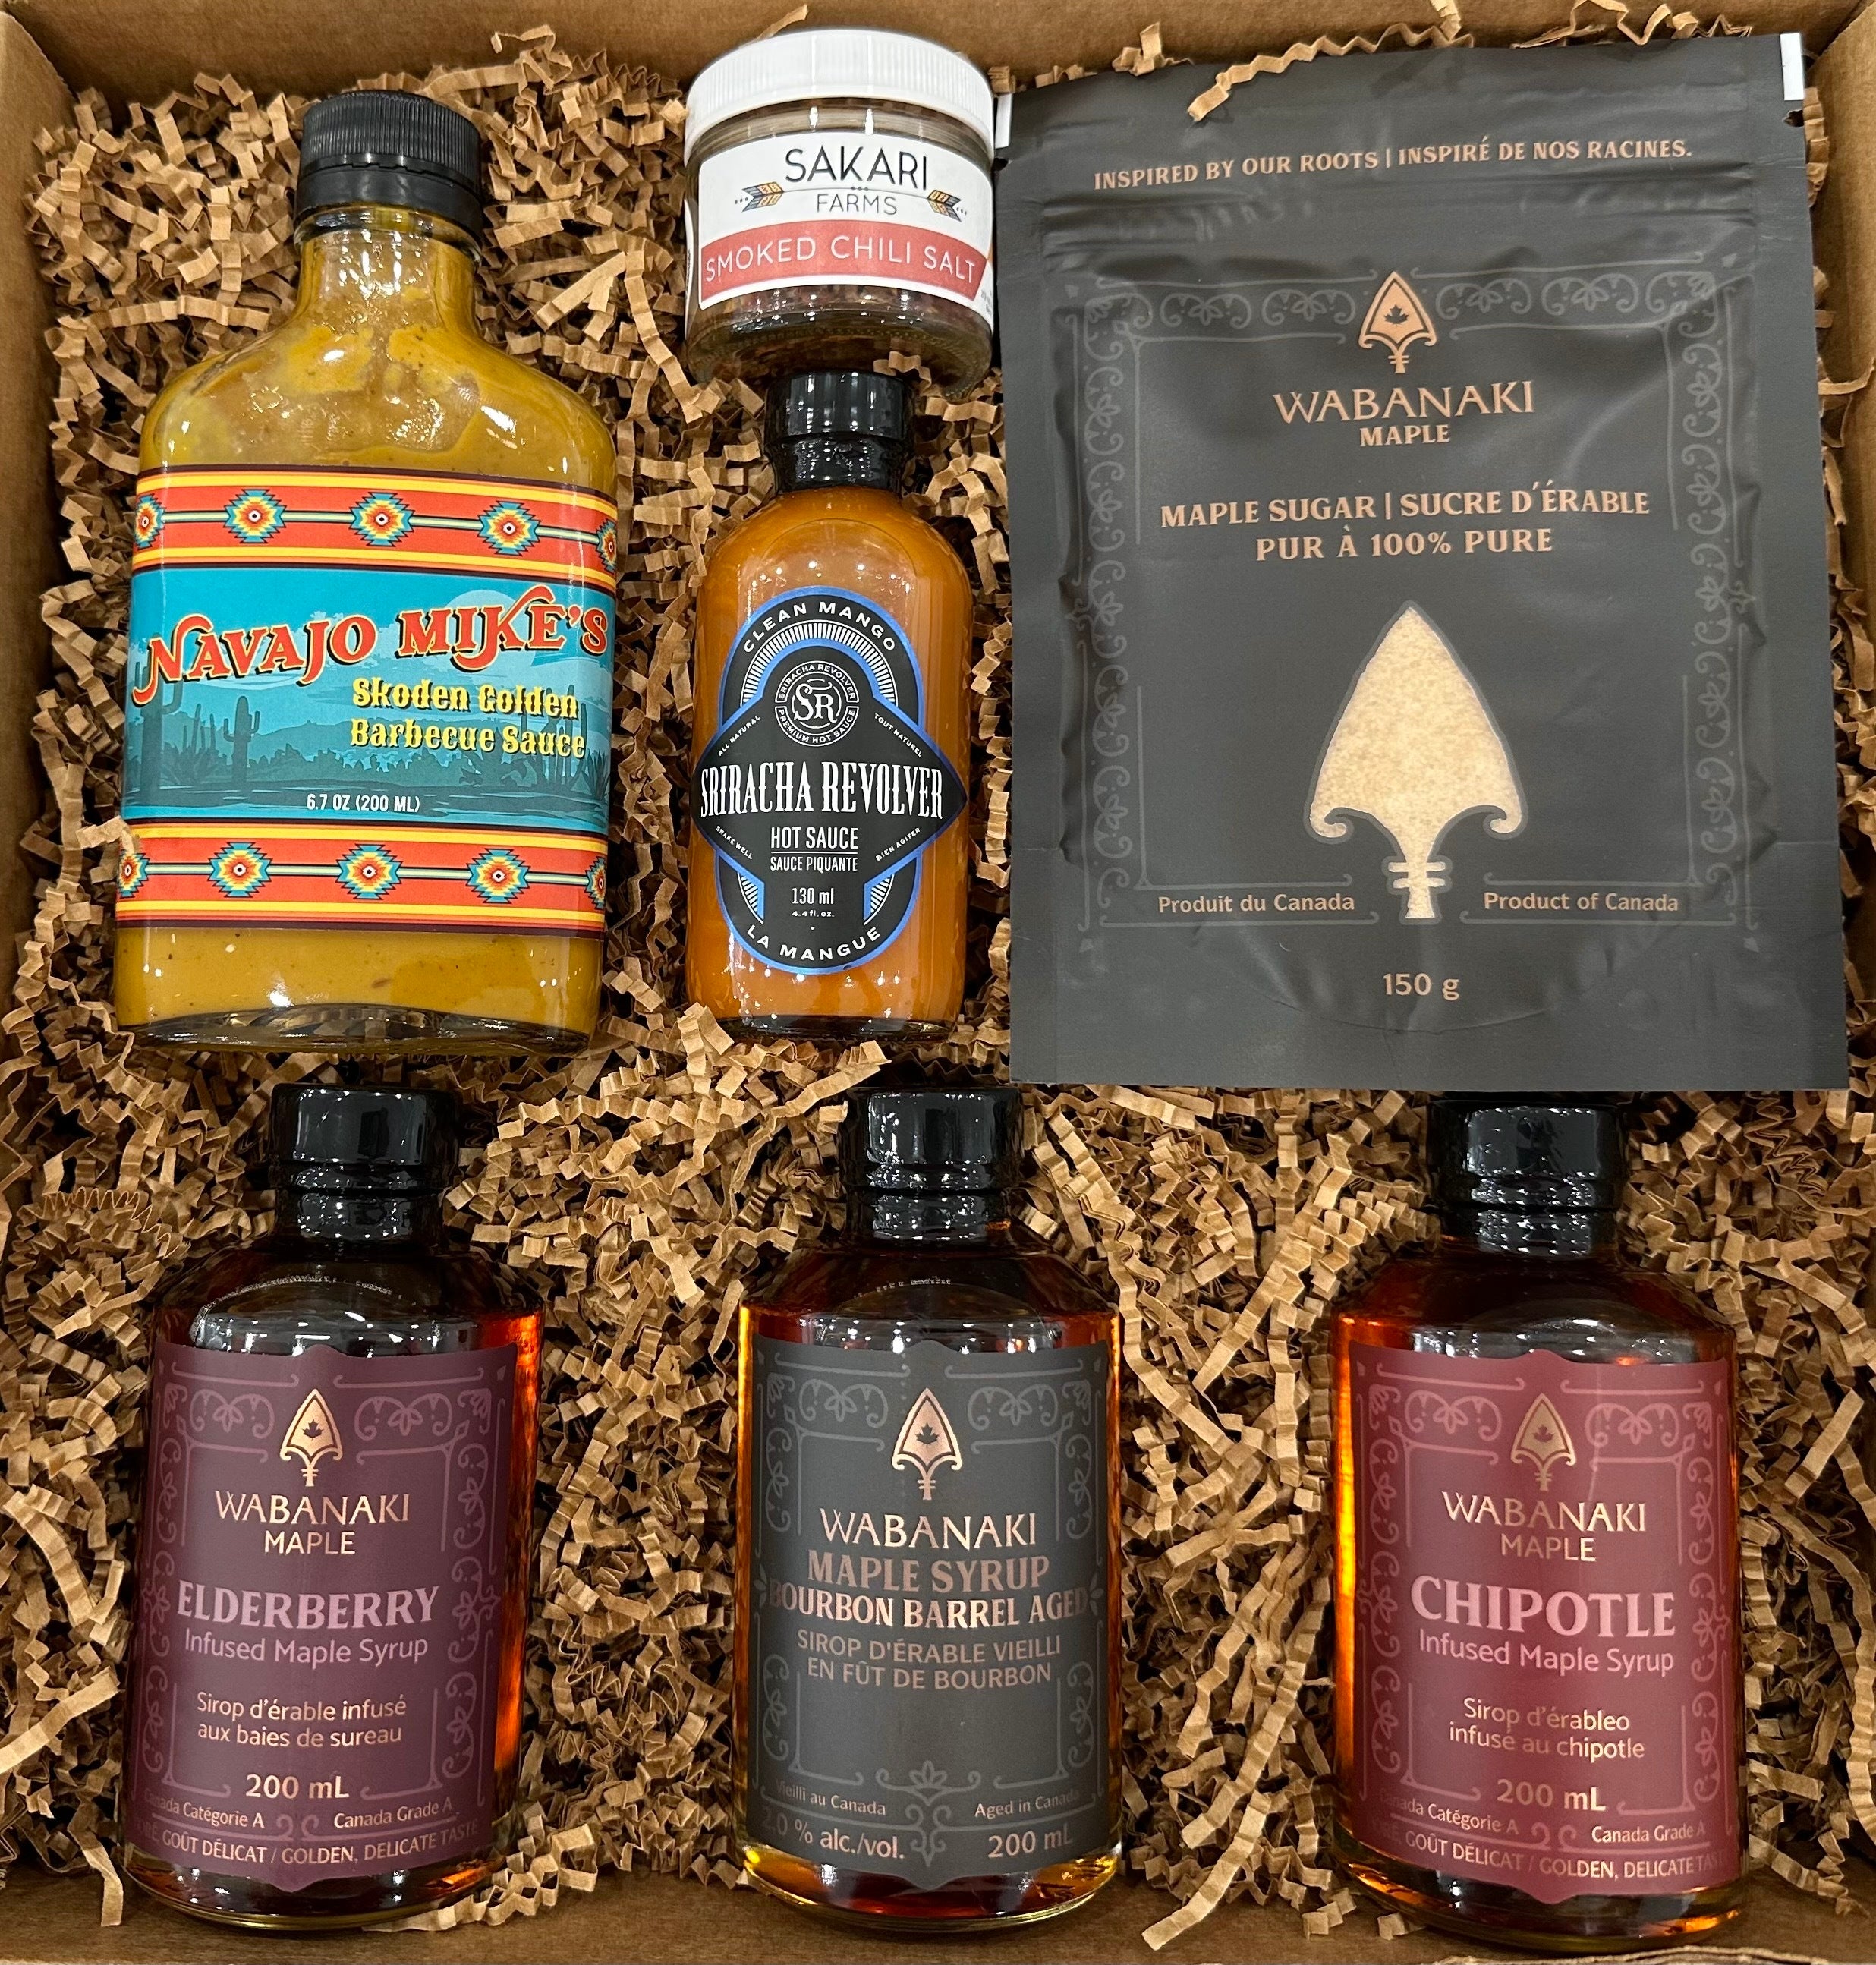 Wabanaki Maple Bareroots Revive Box including our infused maple syrup line, our barrel aged bourbon maple syrup, chipotle infused maple syrup, Navajo Mike's skoden Golden bbq sauce, Sriacha Revolver hot sauce and sakari famrs chili salt